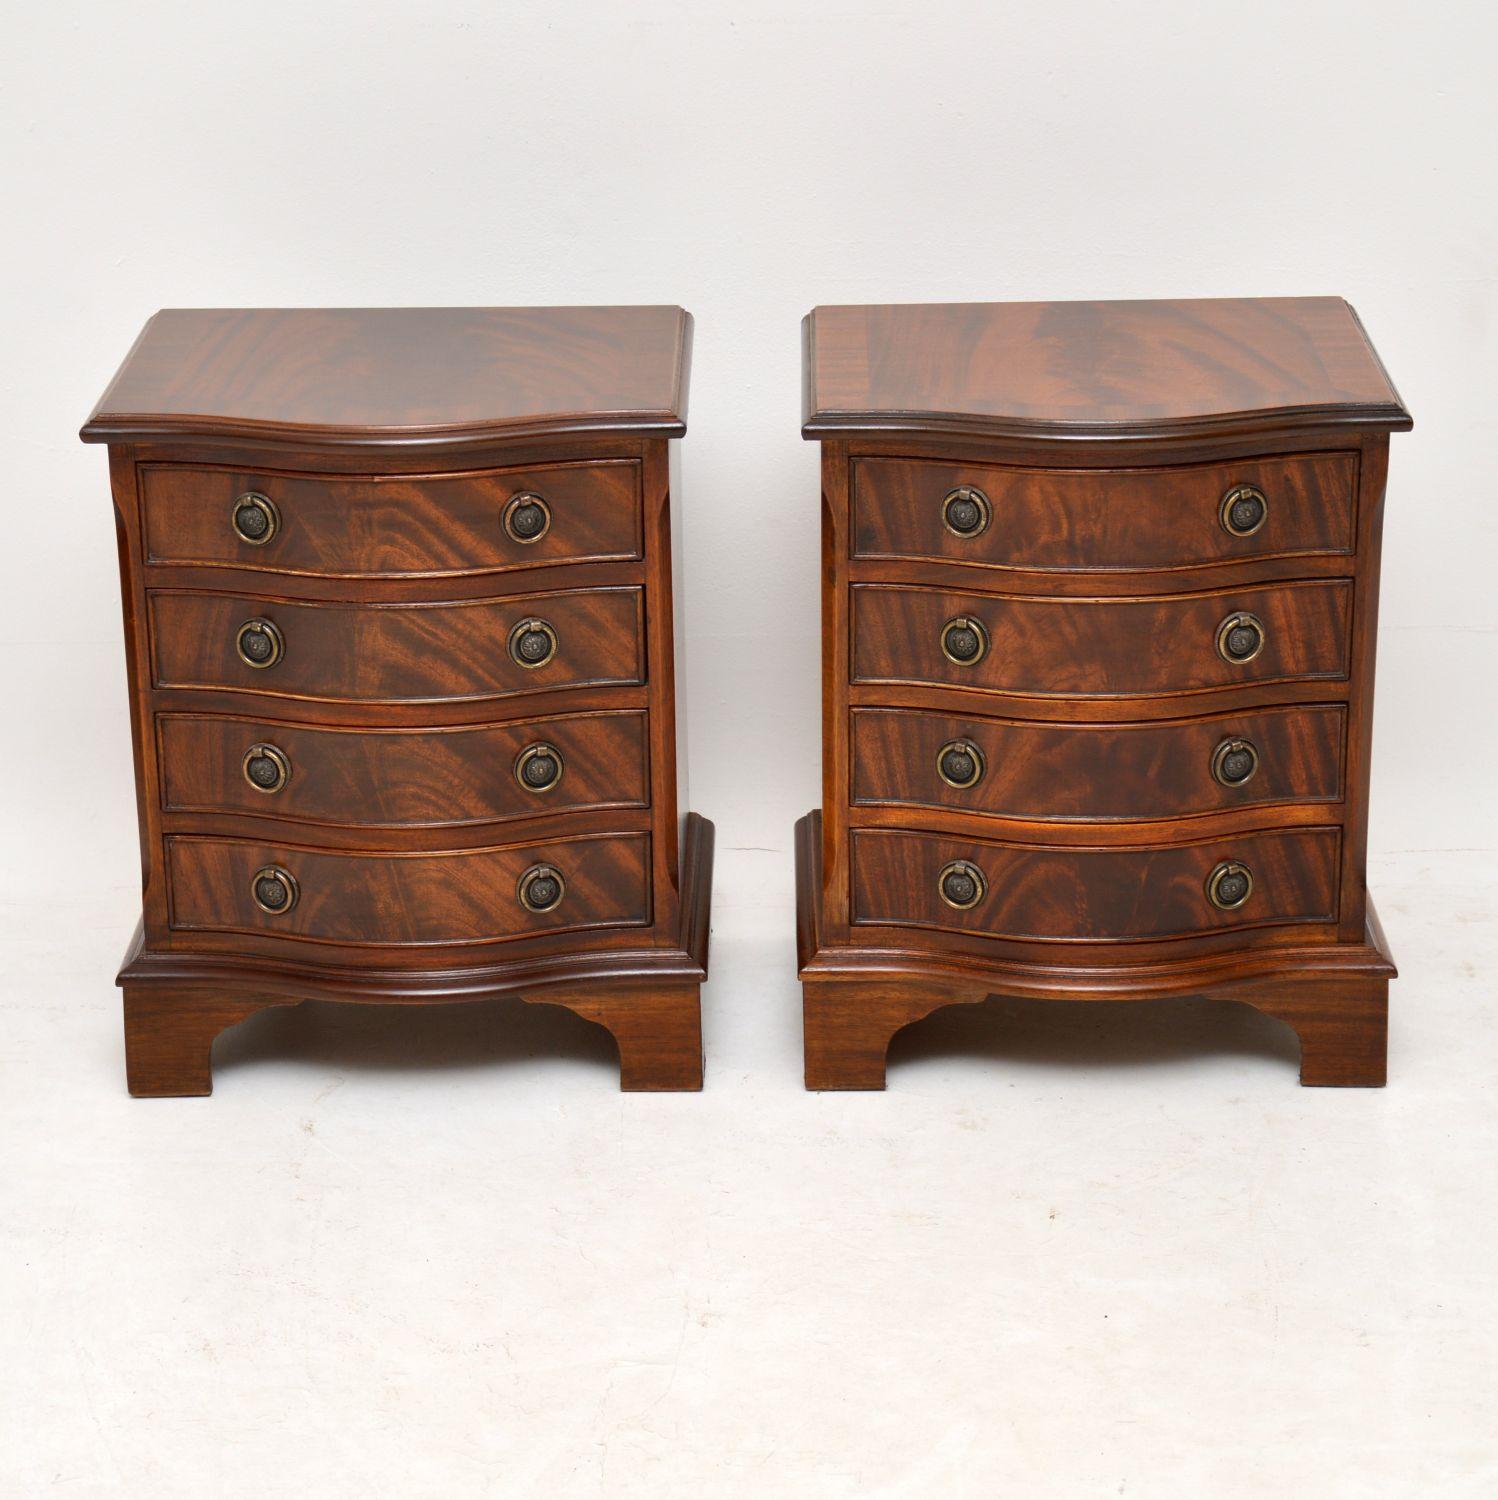 Pair of Antique Georgian style mahogany bedside chests in excellent condition, having just been French polished and dating from circa 1950s period. They have flame mahogany tops and drawer fronts, with cross banding on the top edges. These chests